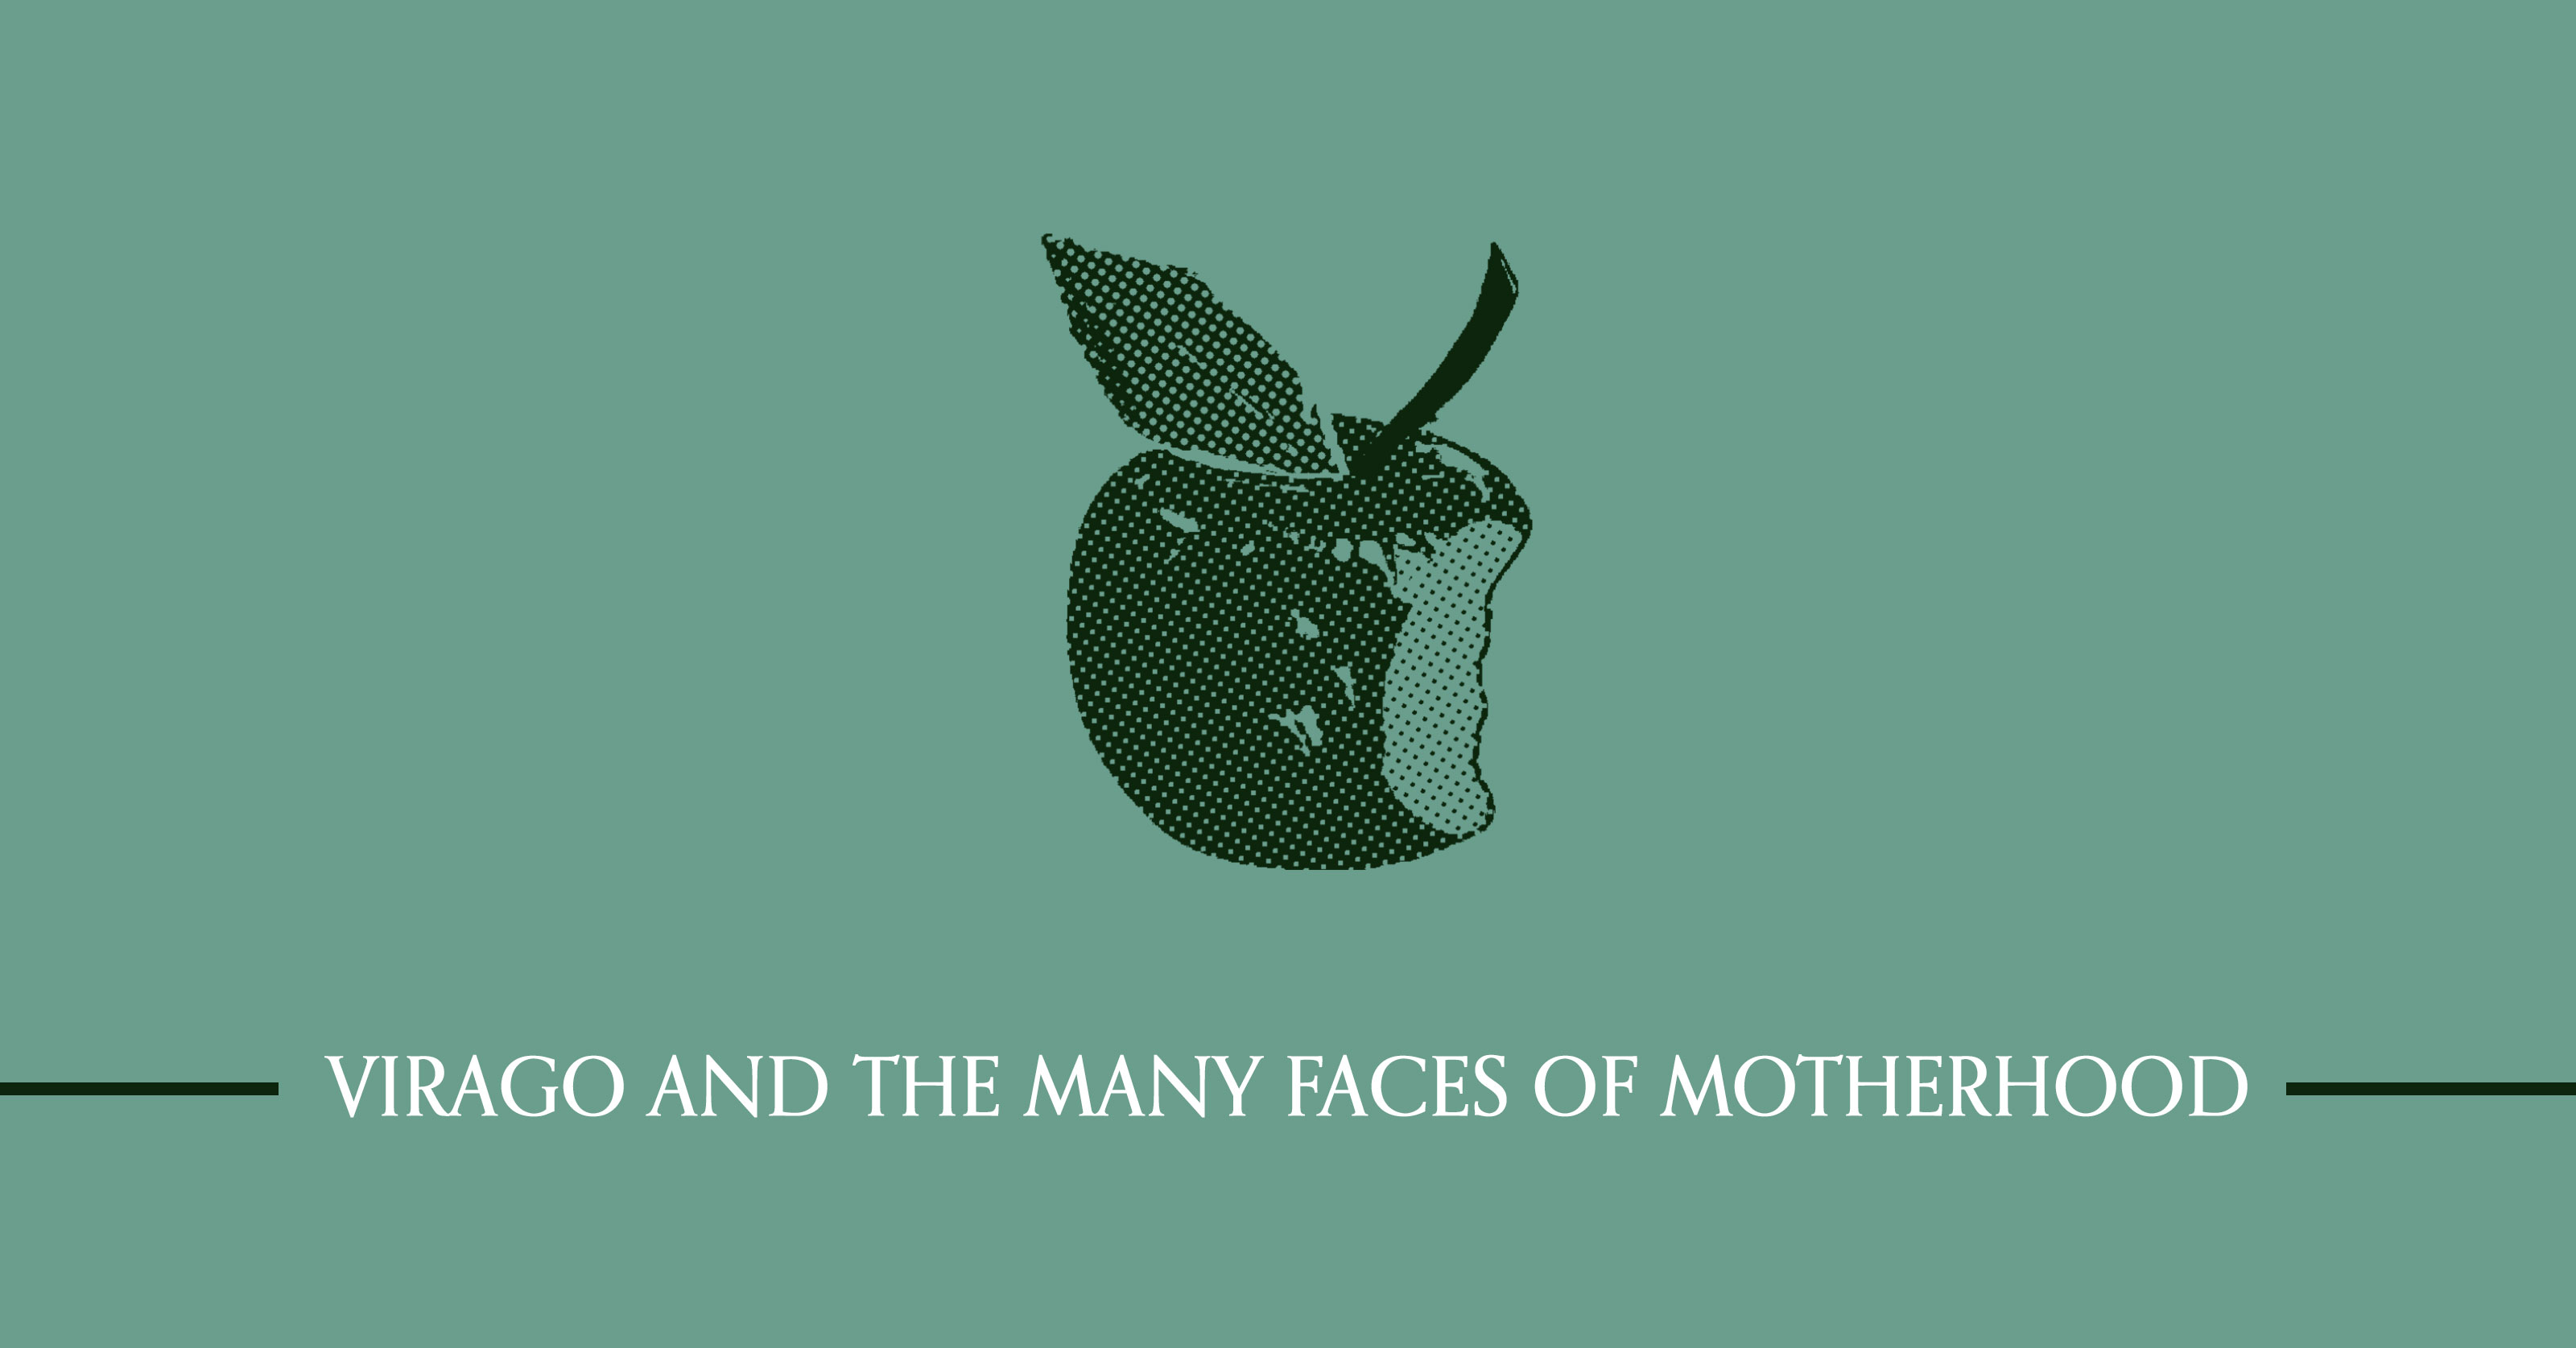 Virago and the many faces of motherhood